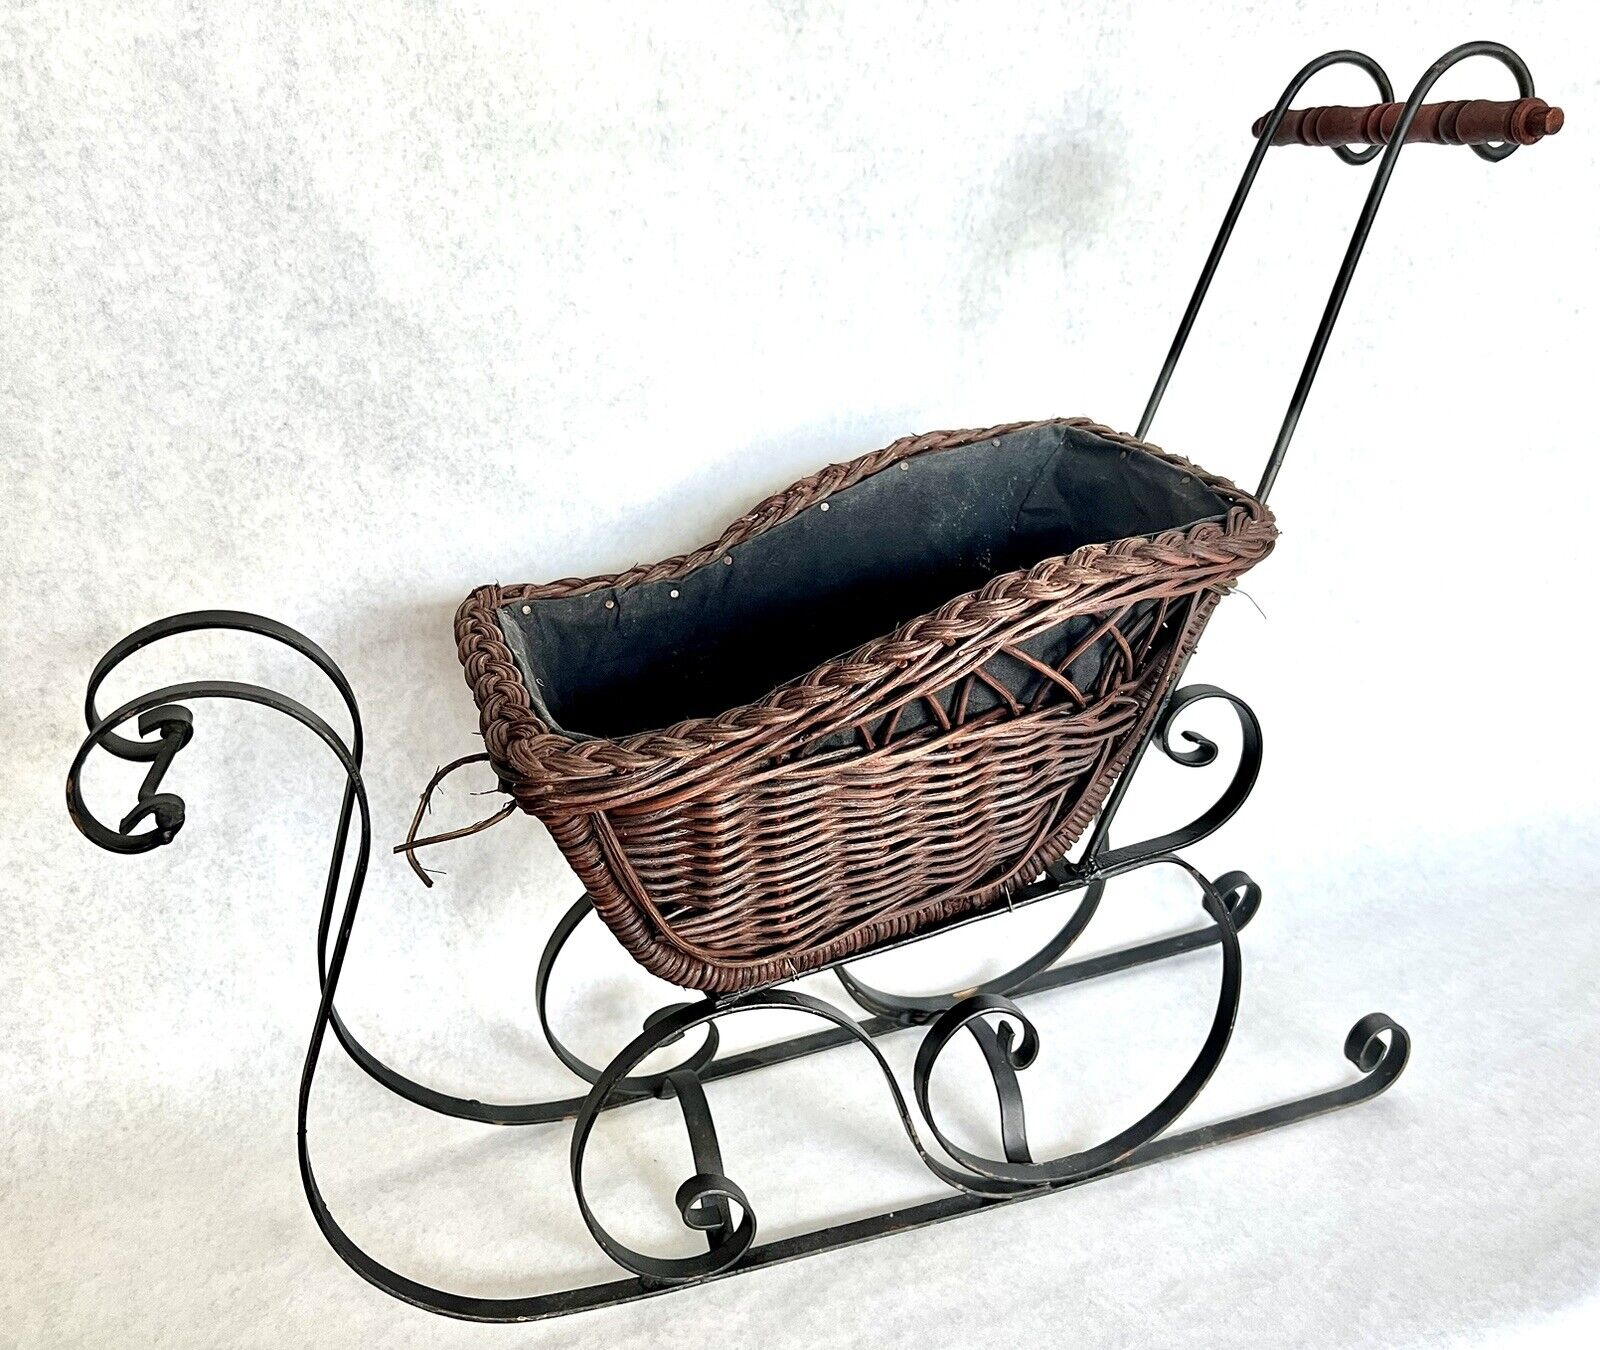 Vintage Sleigh, Iron & Wicker, Holiday Decor or Doll Sleigh, Collectible 24” In.